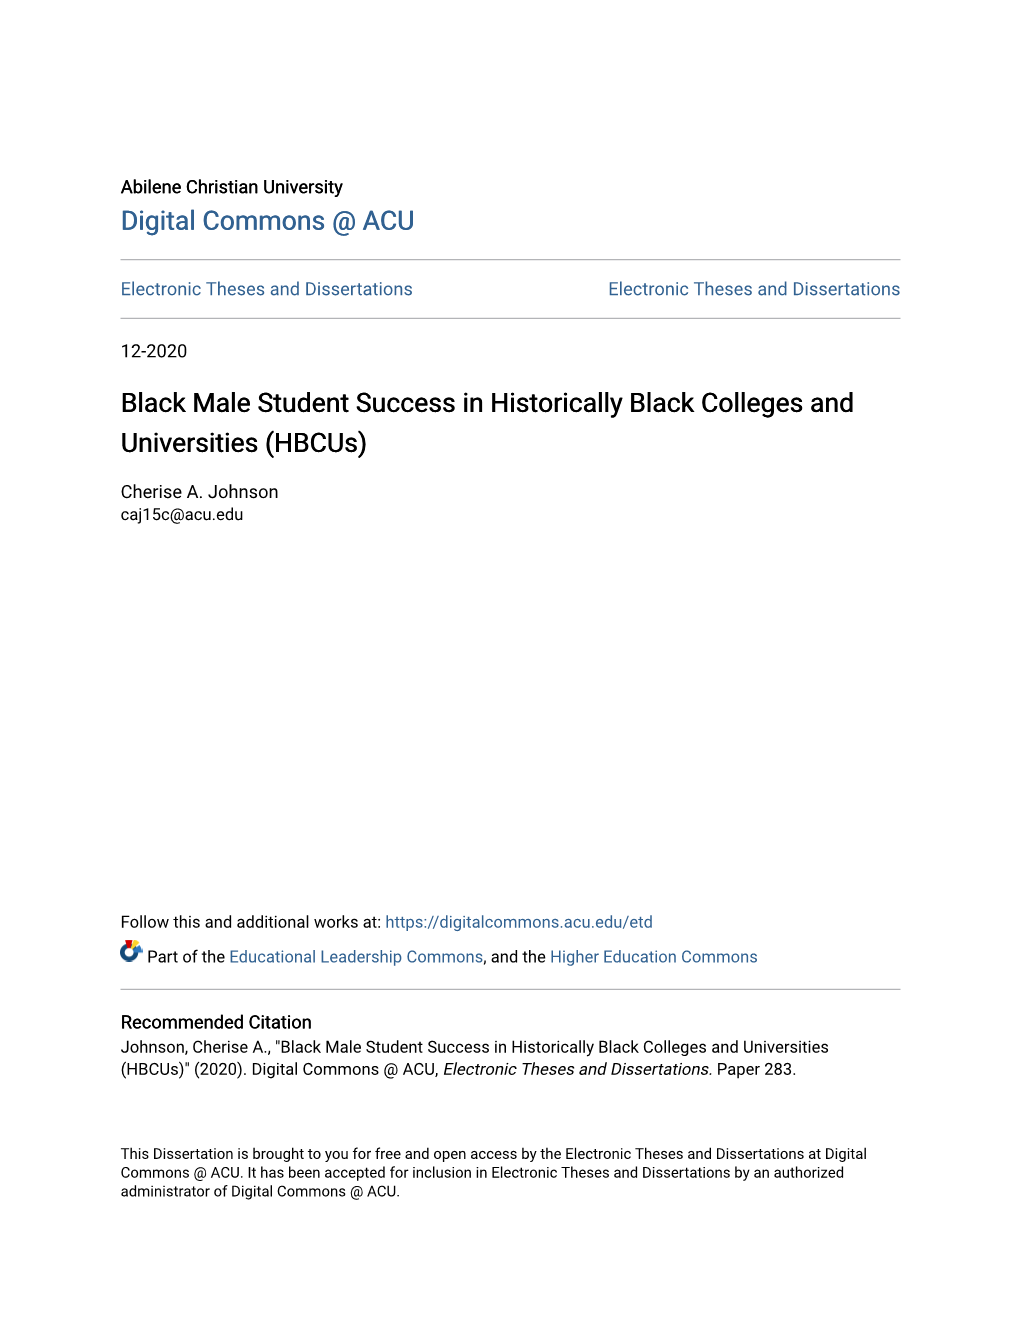 Black Male Student Success in Historically Black Colleges and Universities (Hbcus)